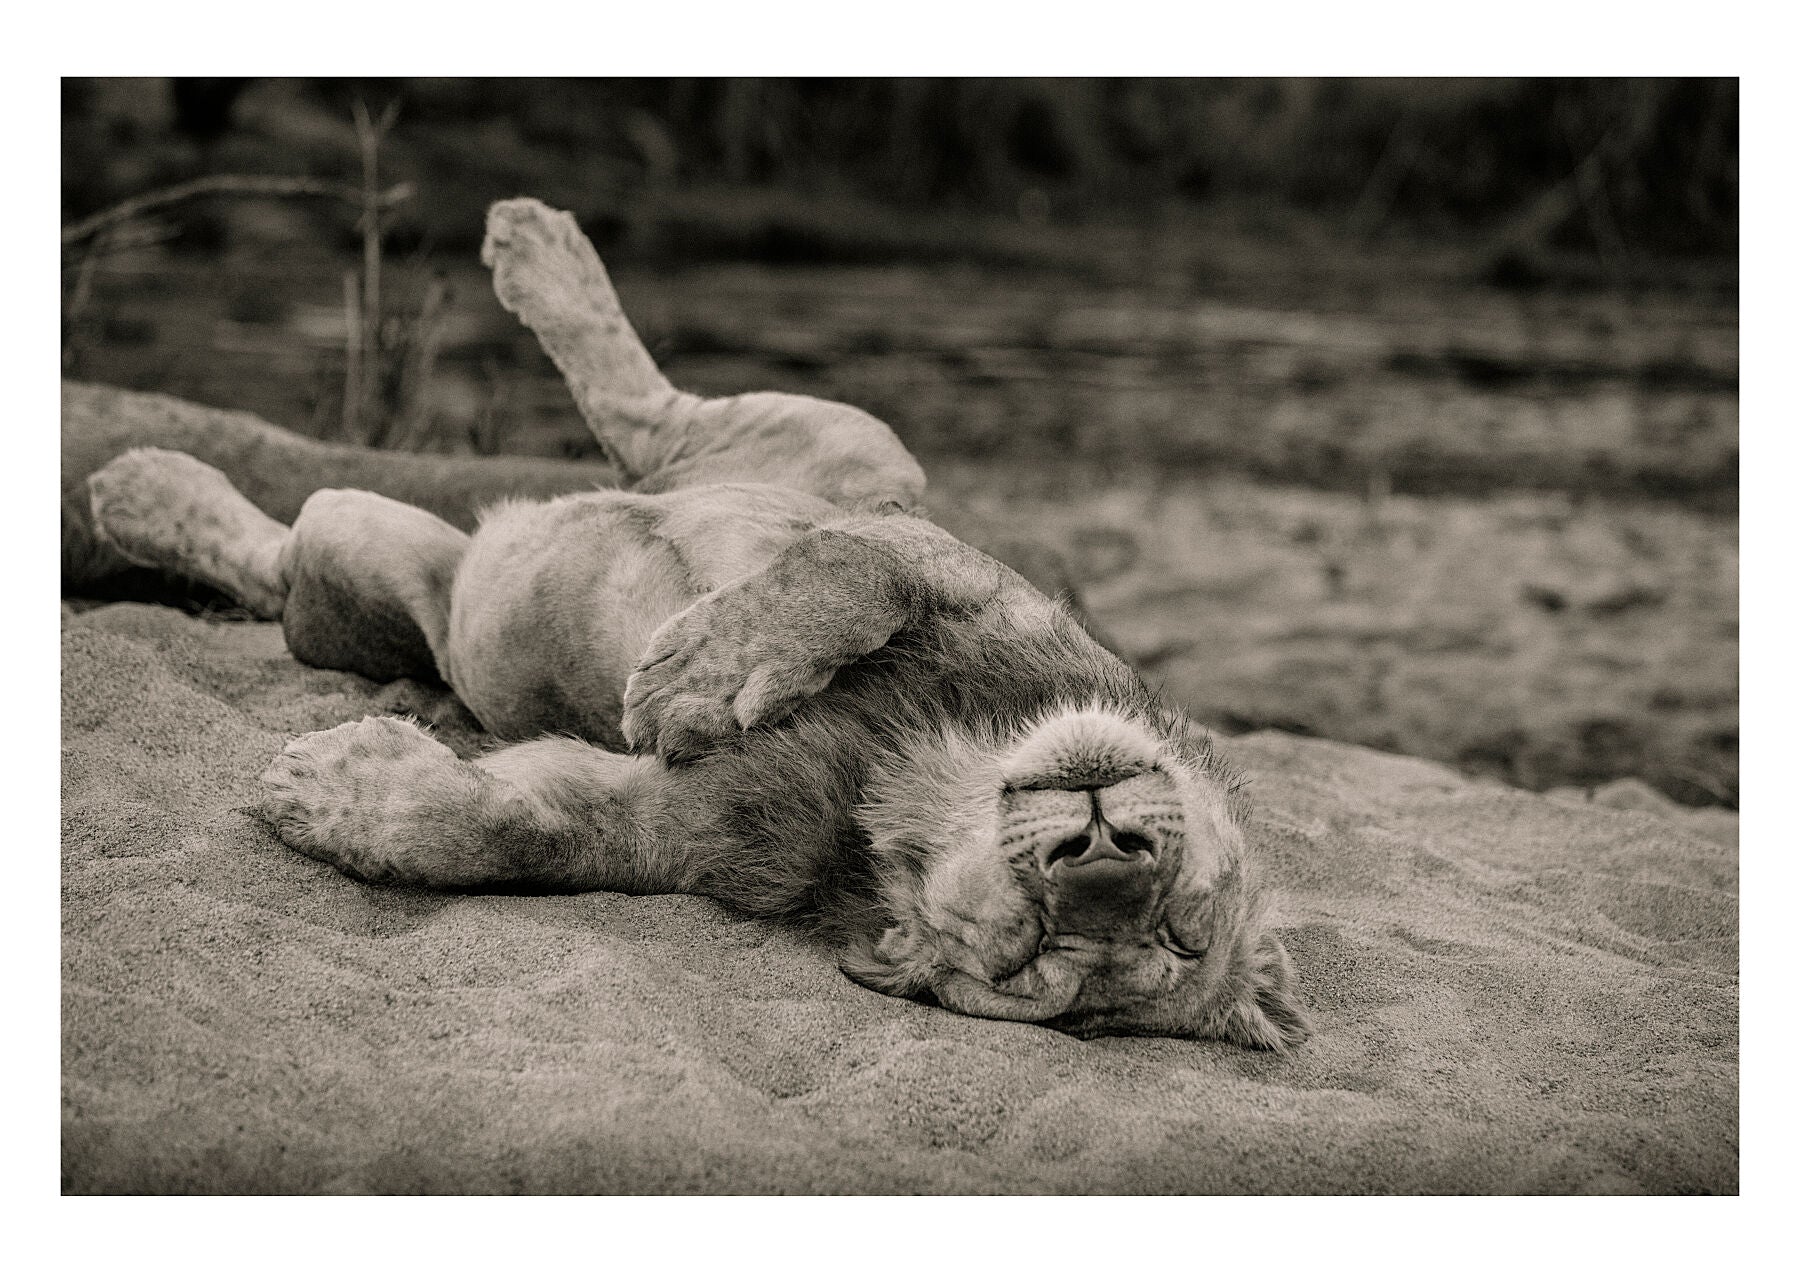 Female lion in repose after a hunt